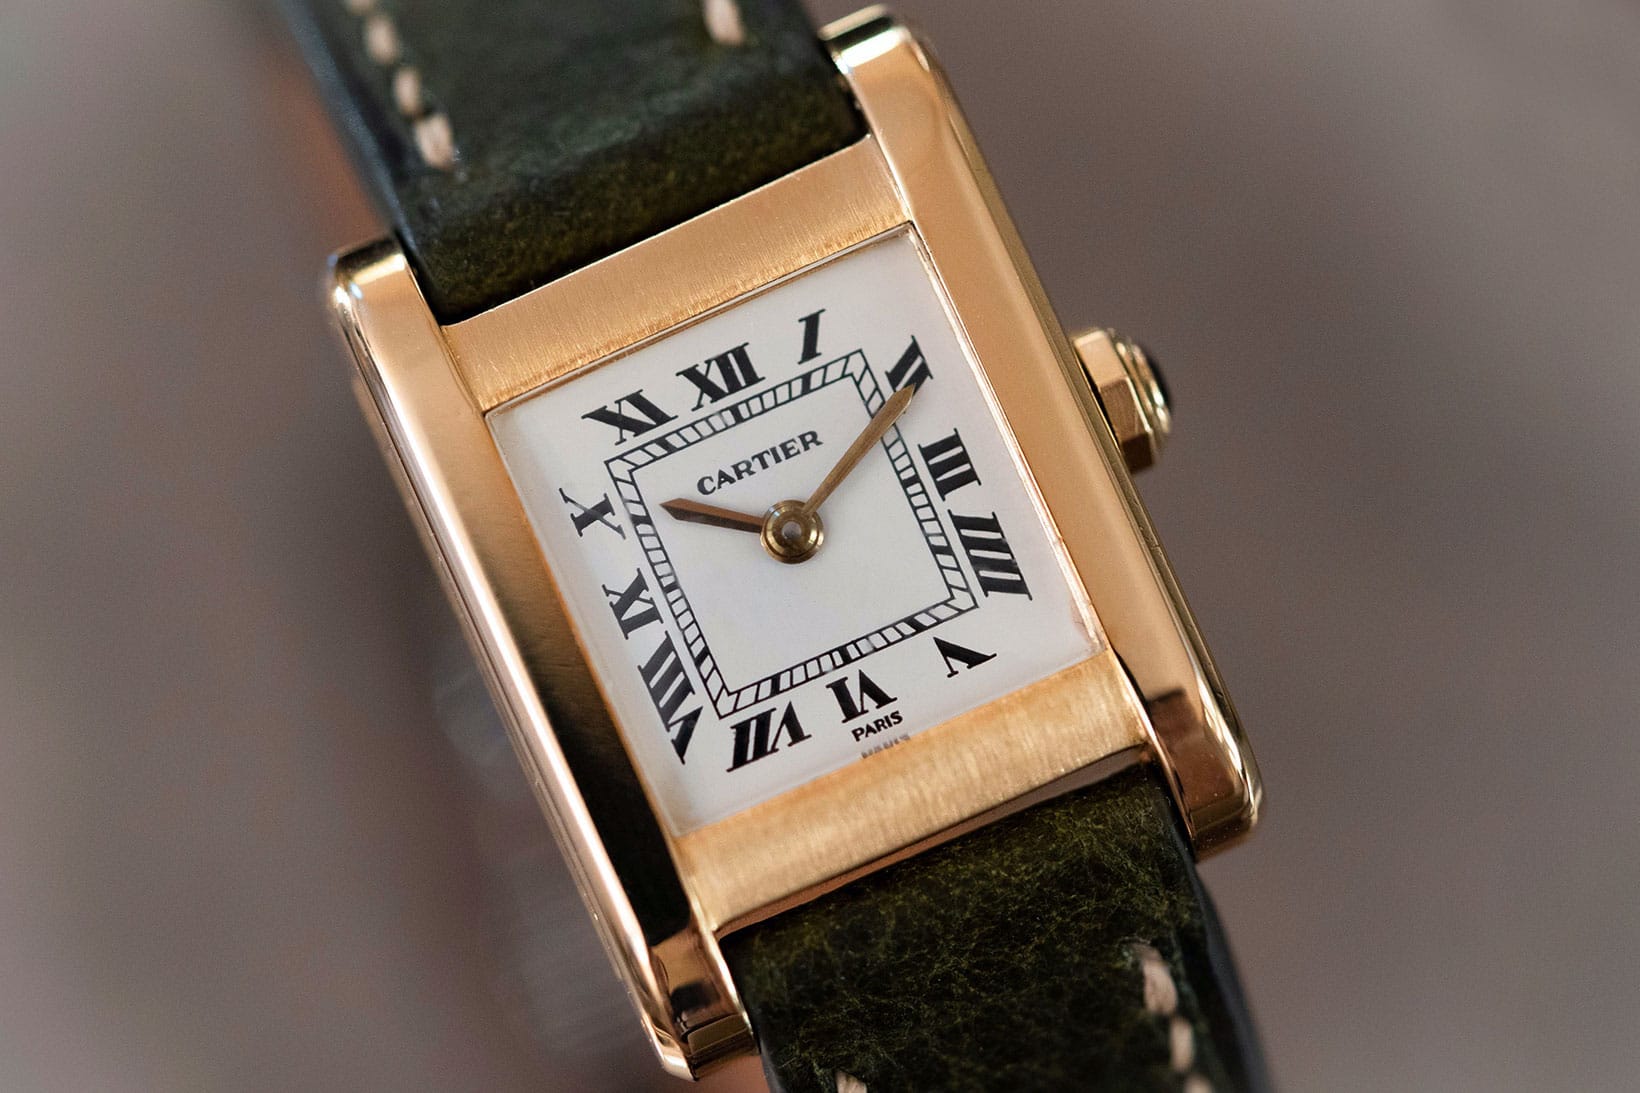 entry level cartier watch